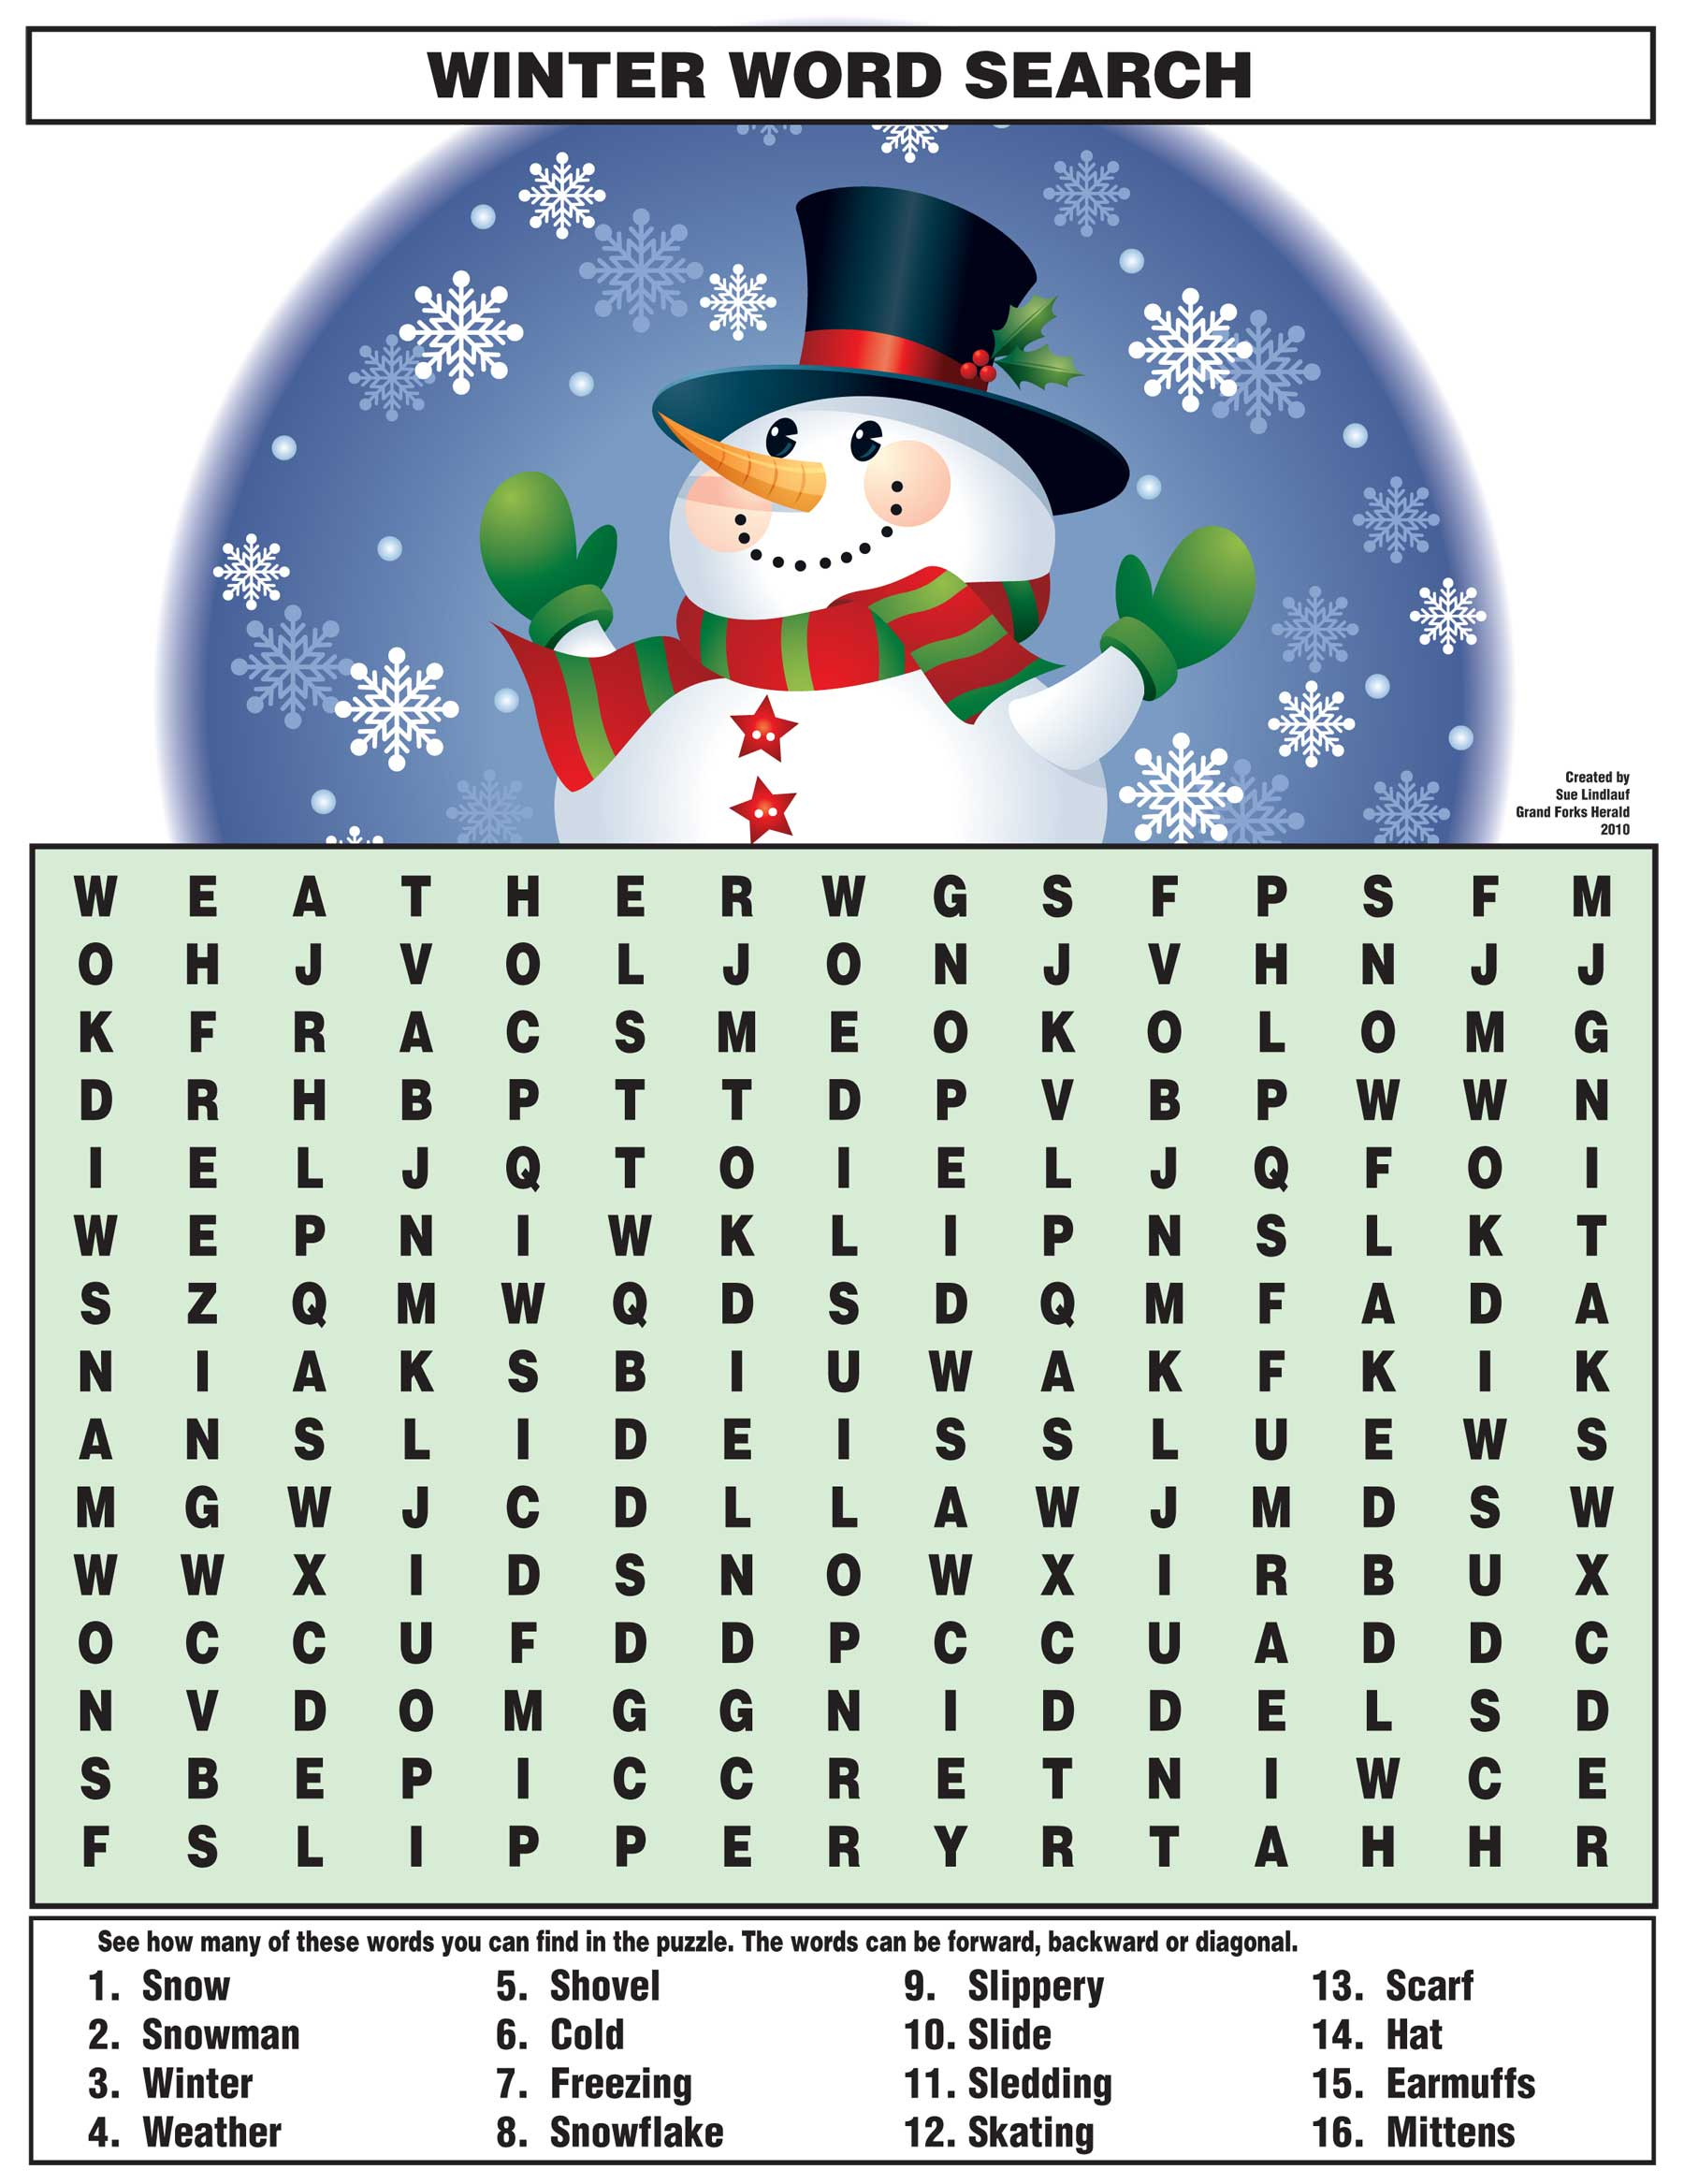 Winter Word Search | Kids Activities - Printable Snowman Puzzle